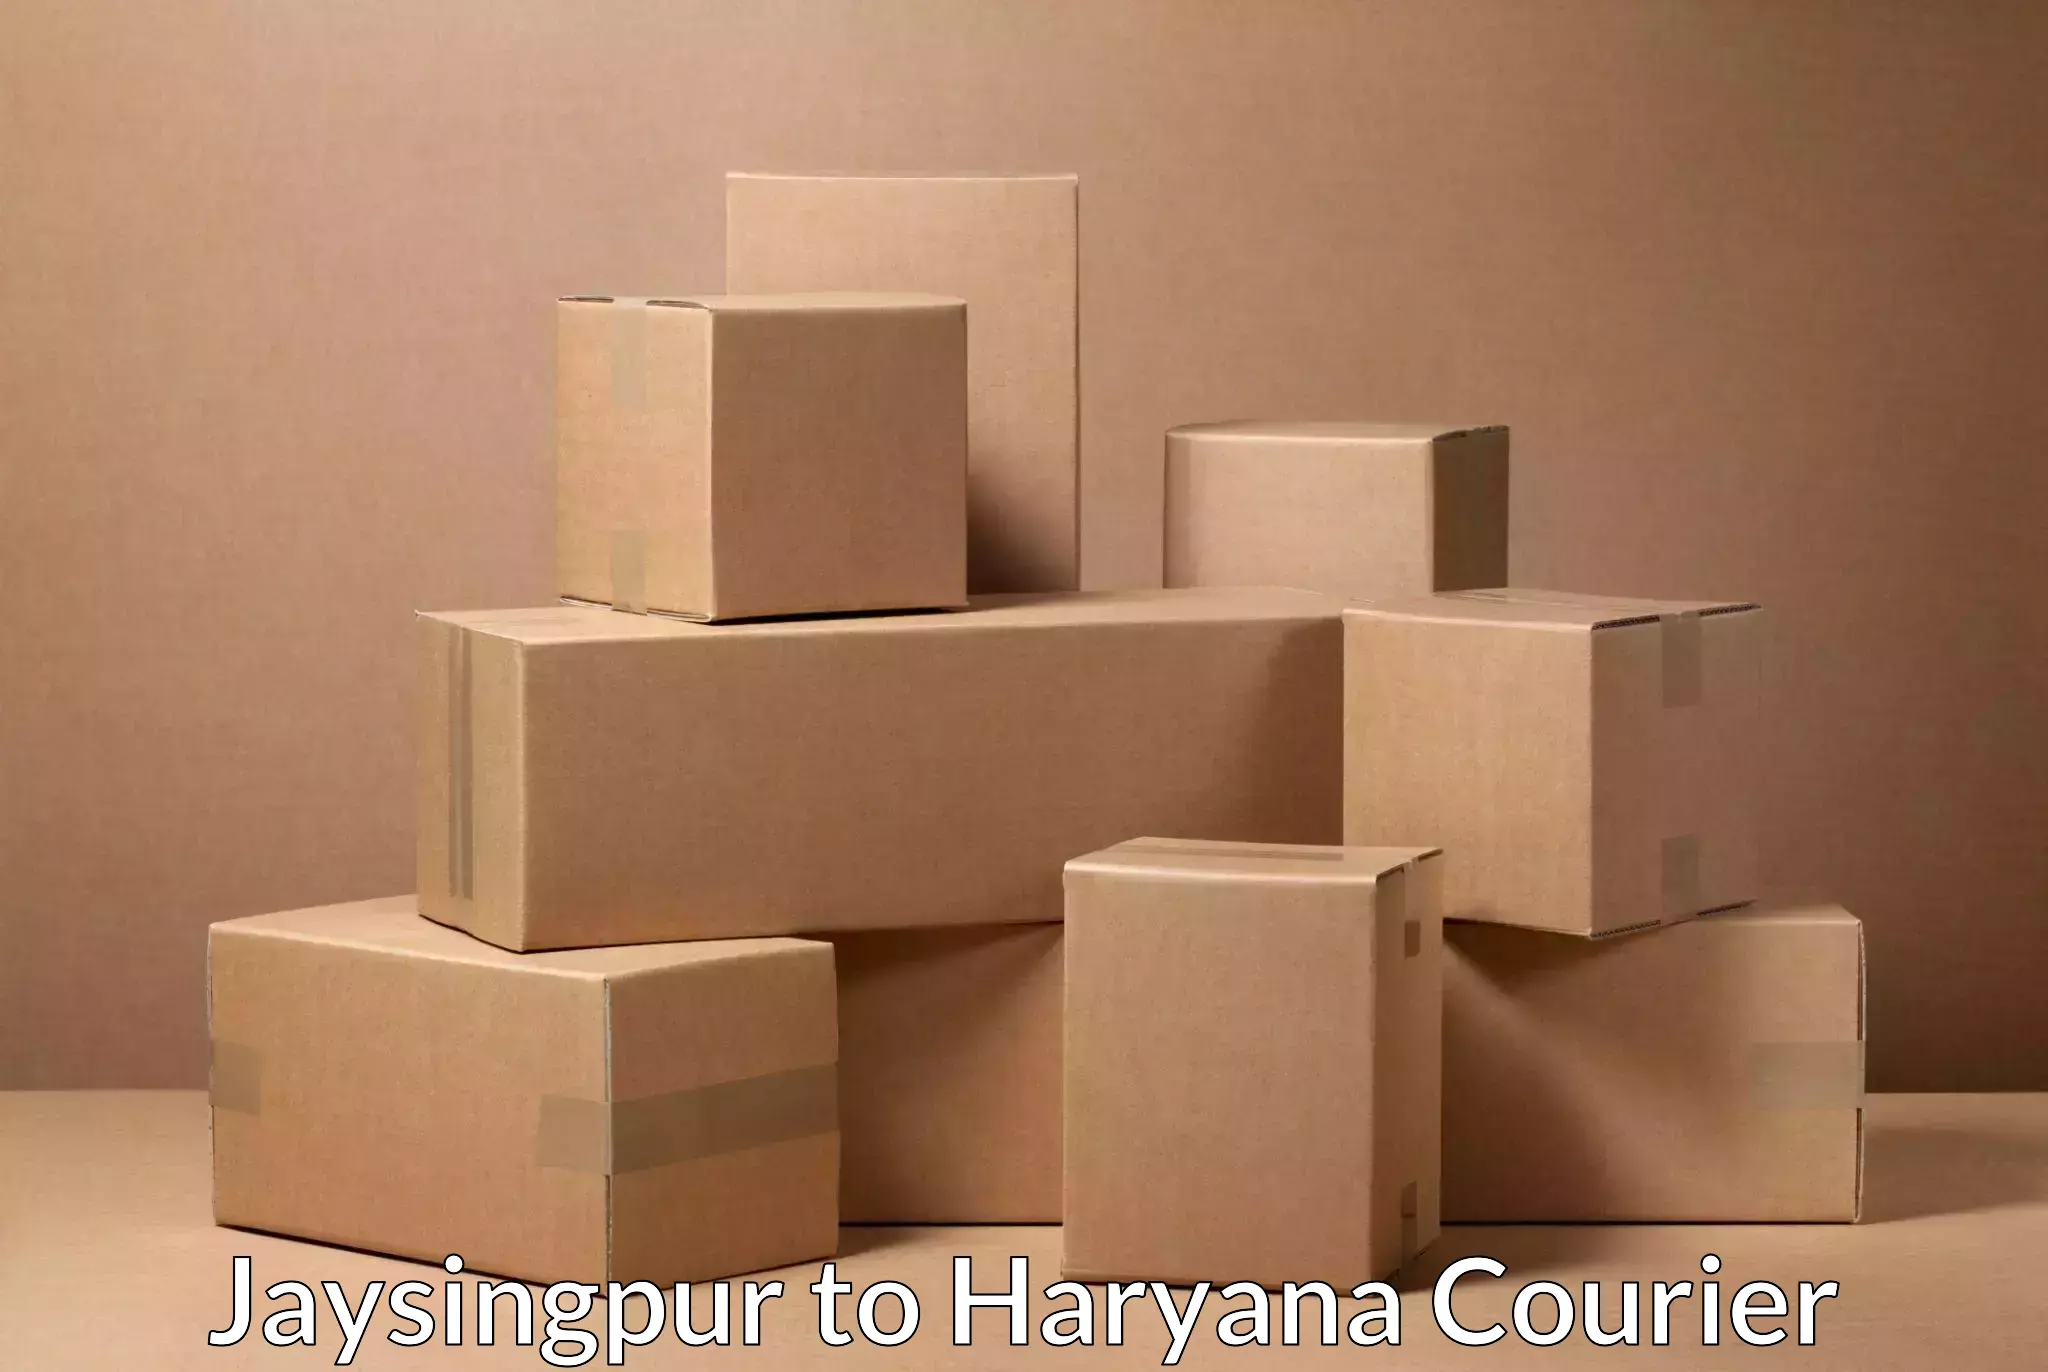 Efficient shipping operations in Jaysingpur to NCR Haryana